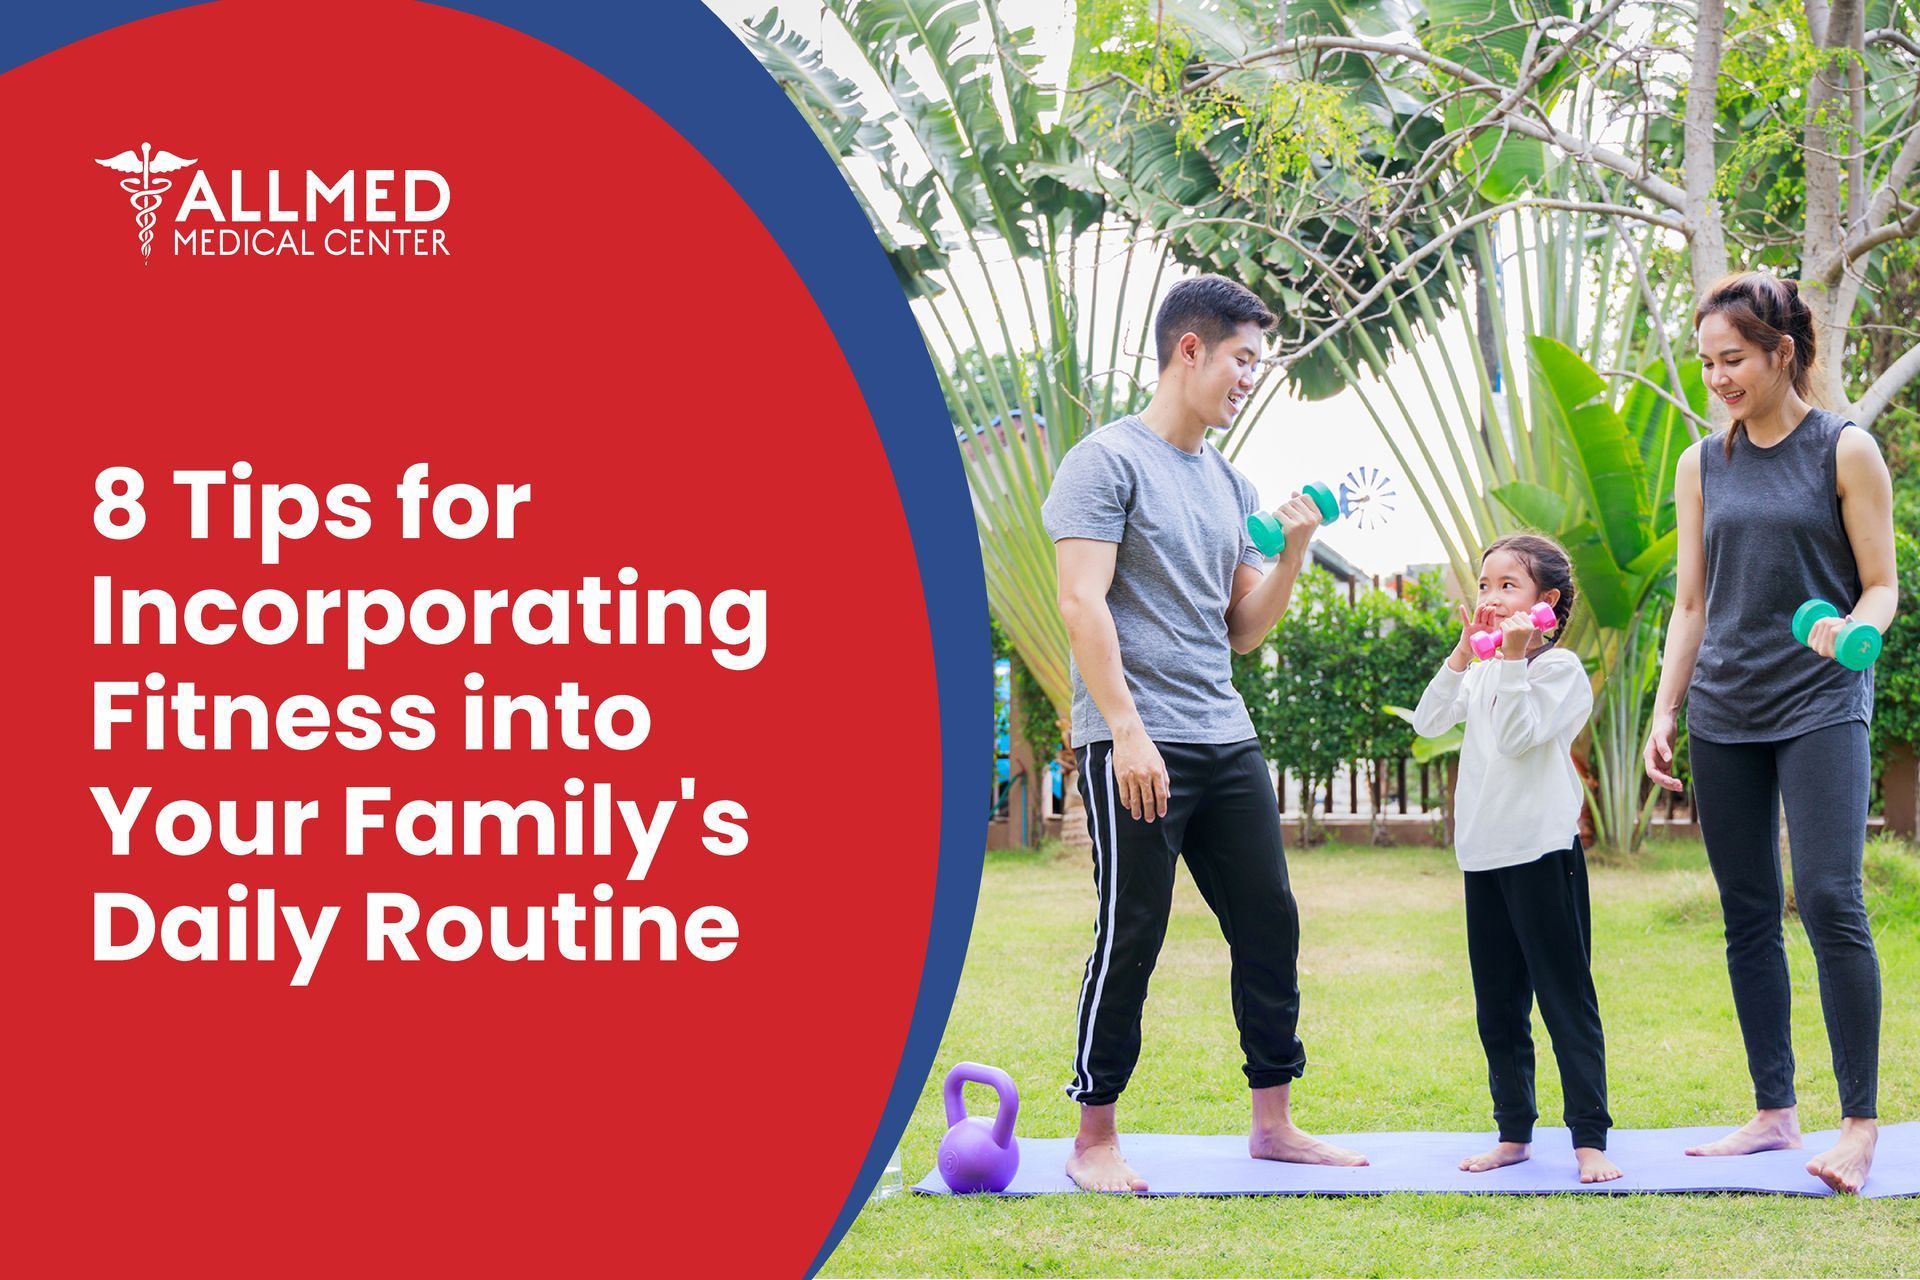 8 Tips for Incorporating Fitness Into Your Family’s Daily Routine